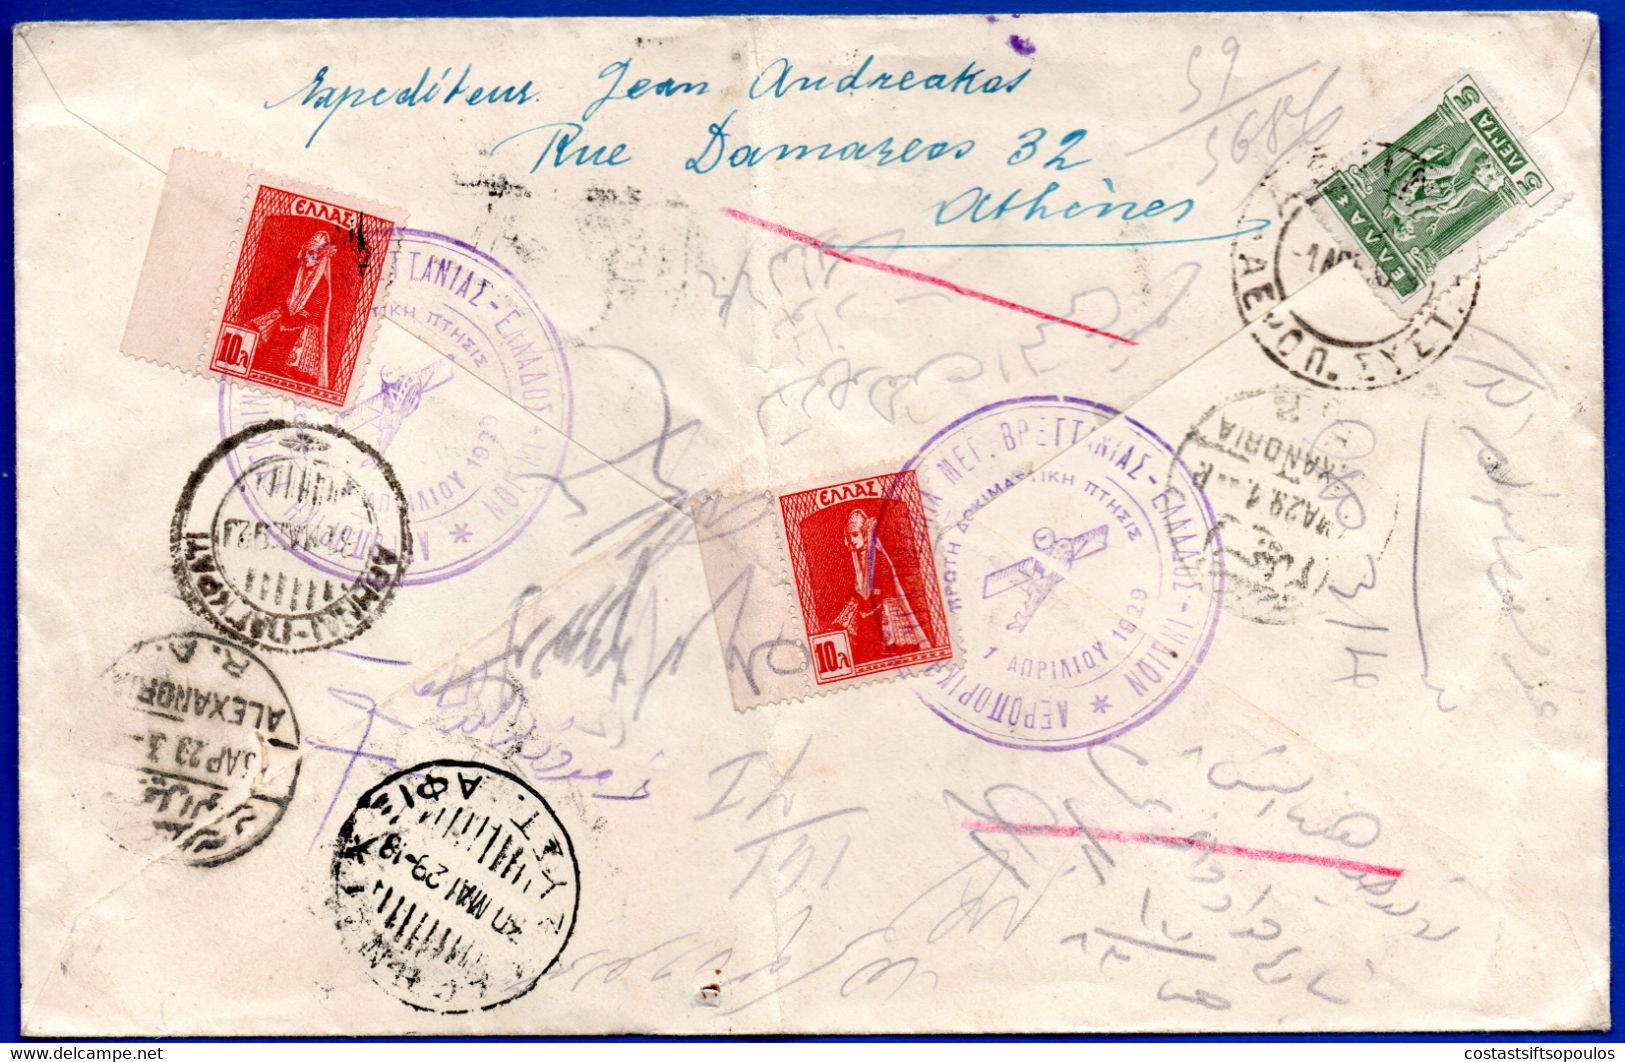 671.1929 ATHENS-ALEXANDRIA 1st. FLIGHT MULTIFRANKED RETURNED COVER.IMPERIAL AIRWAYS GB-GREECE-INDIA FOLDED VERTICALLY - Covers & Documents